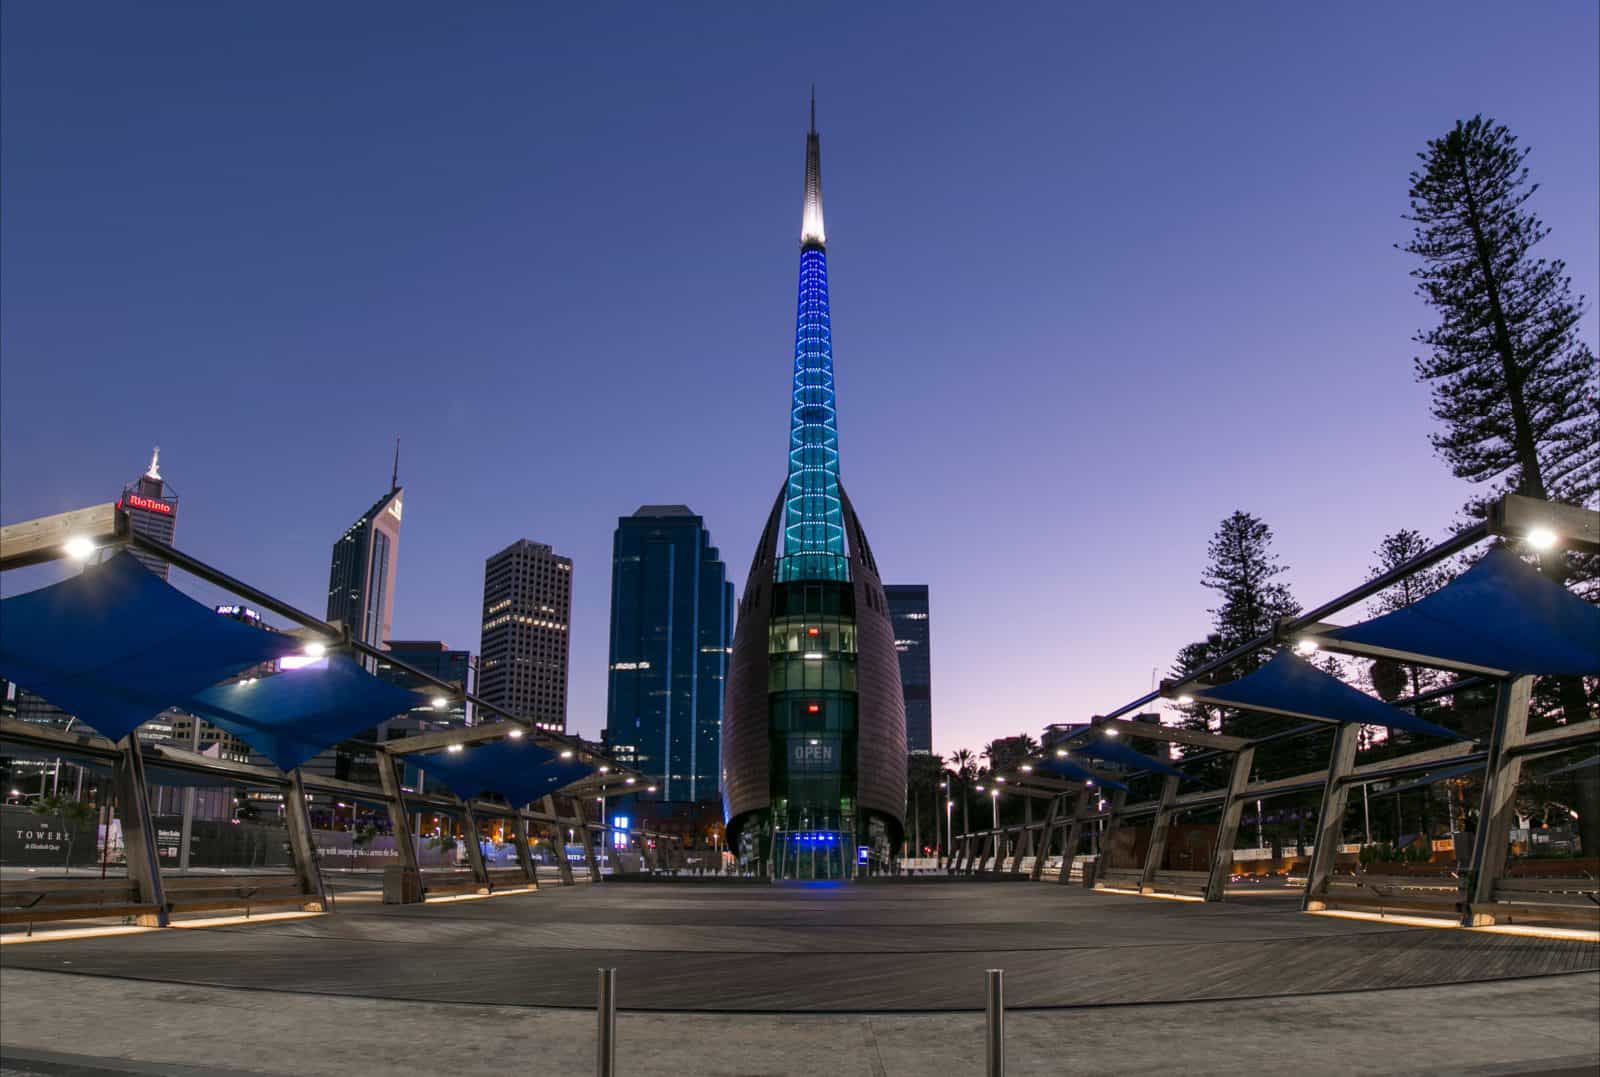 The Bell Tower, Perth, Western Australia